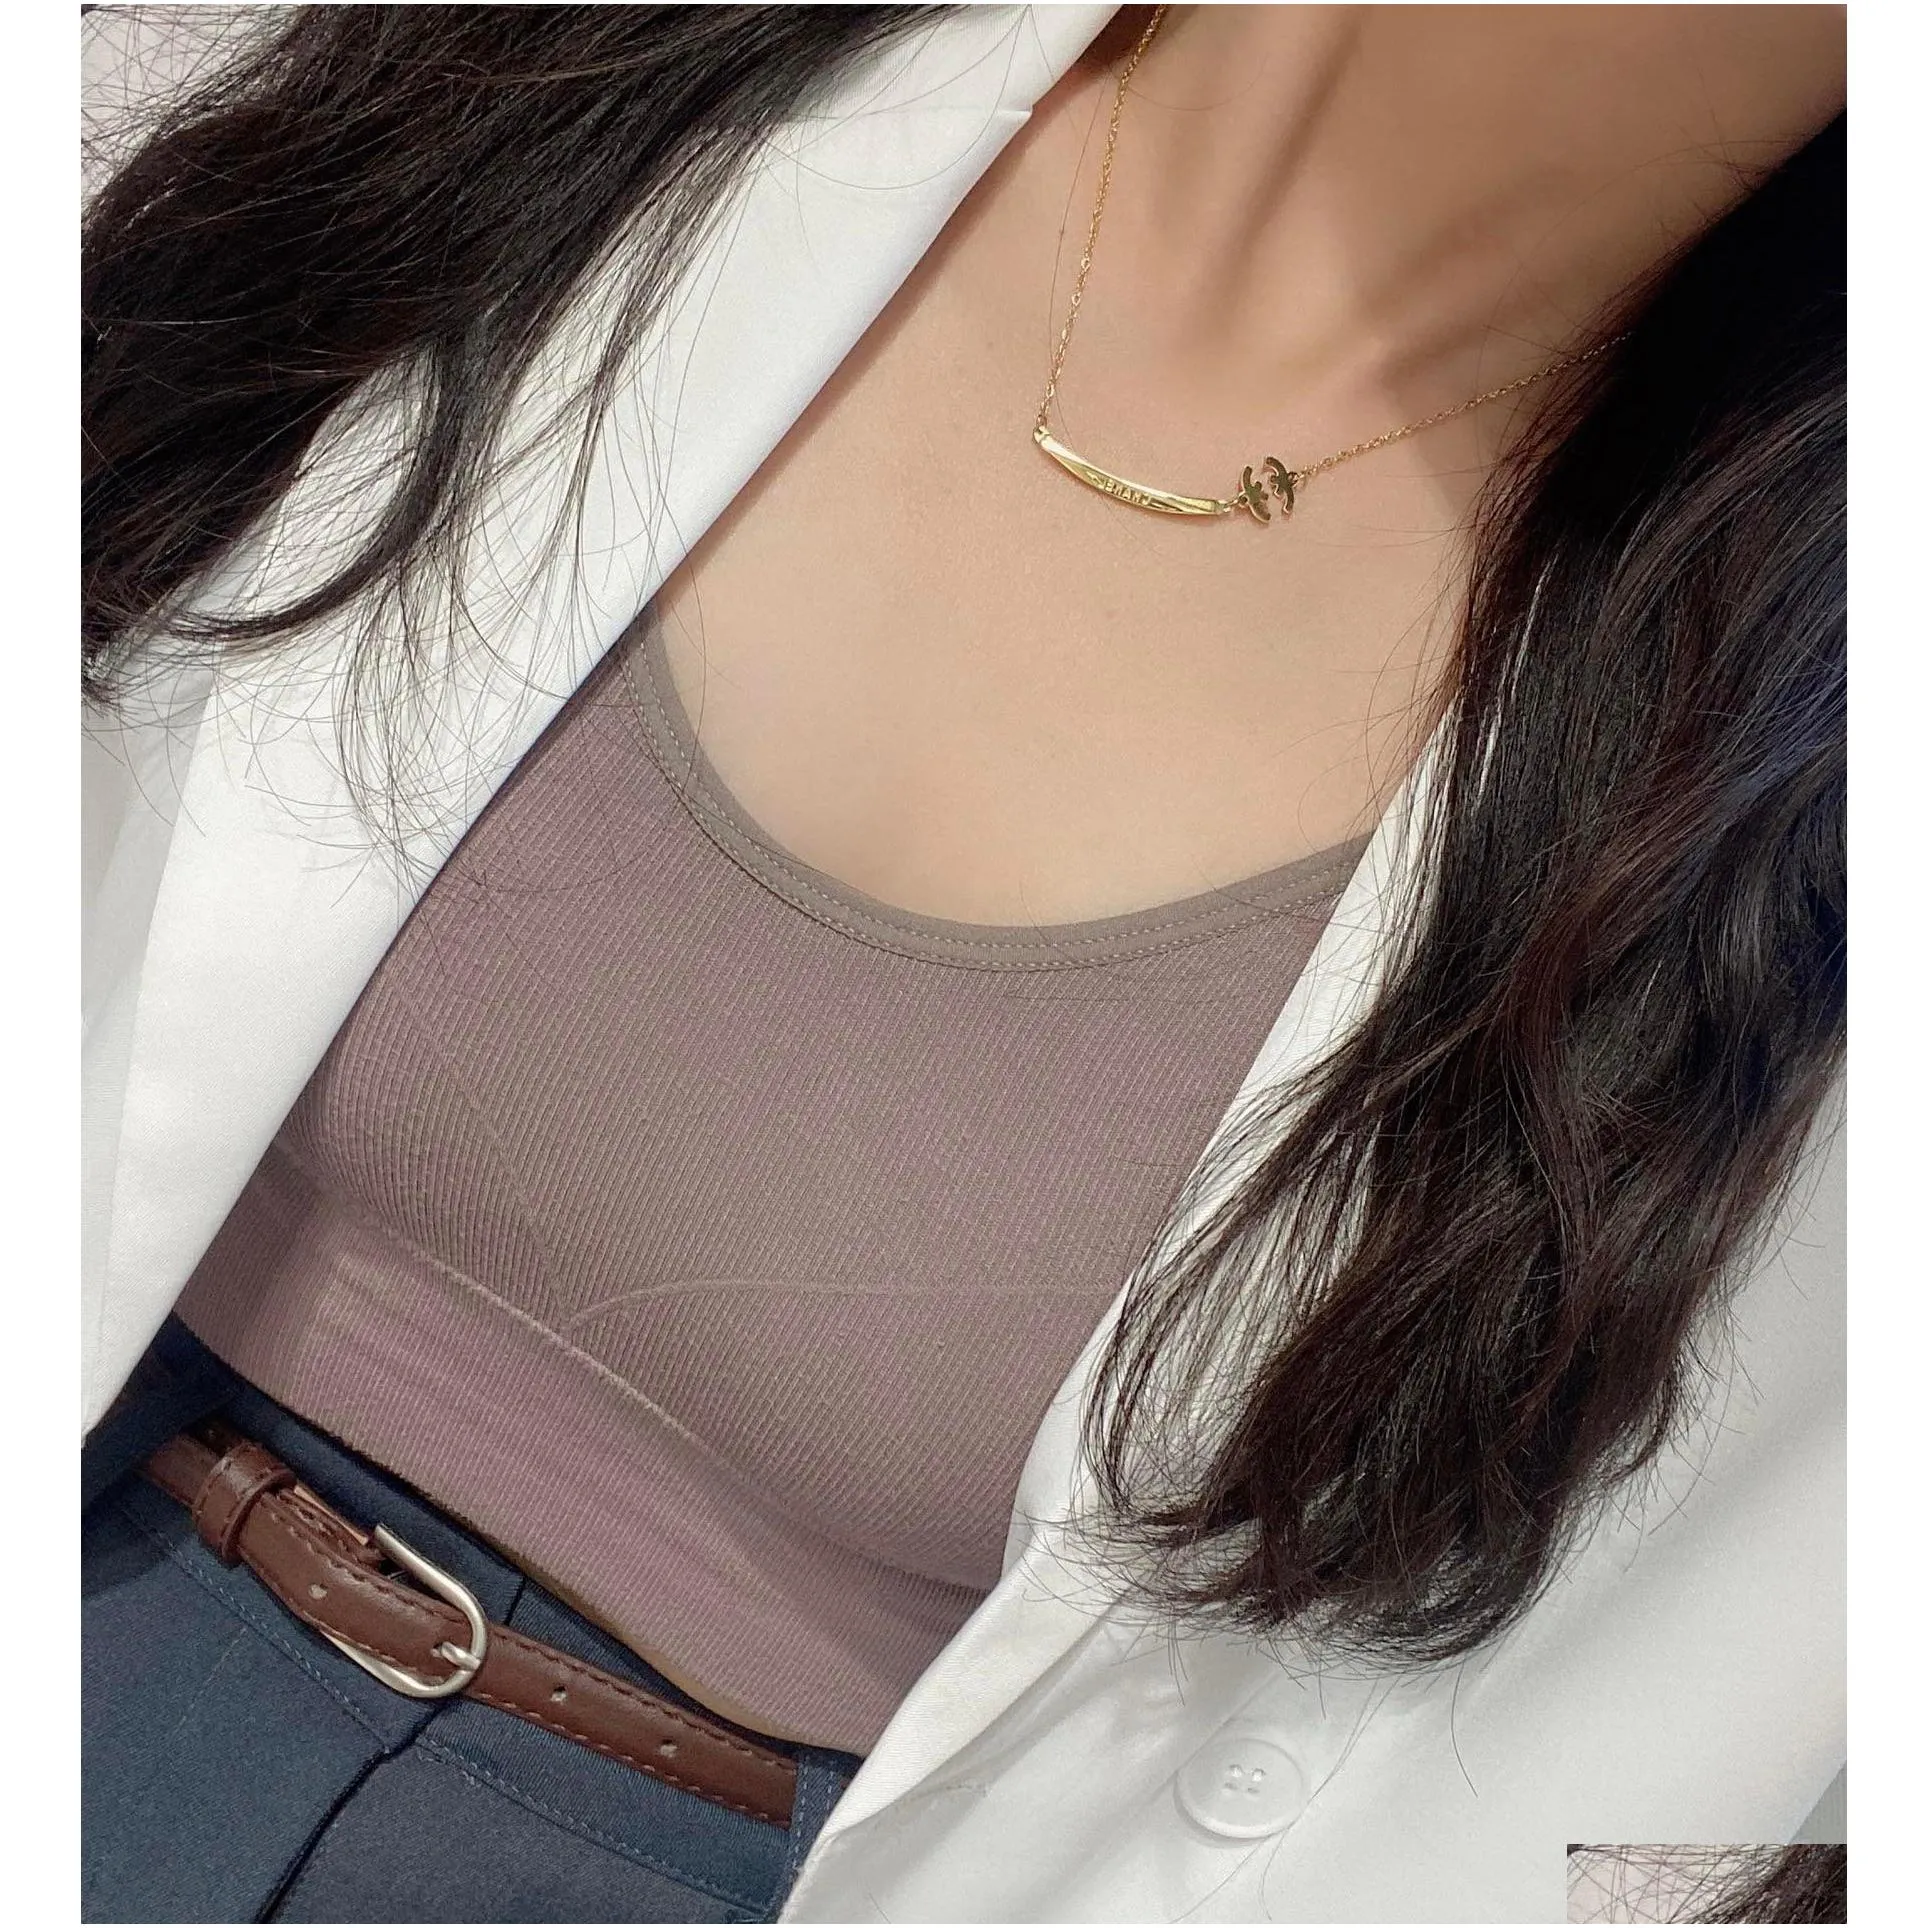 luxury brand elbow letter pendant necklace designed for women long chain 18k gold plated necklace designer jewelry exquisite accessories couple gift with